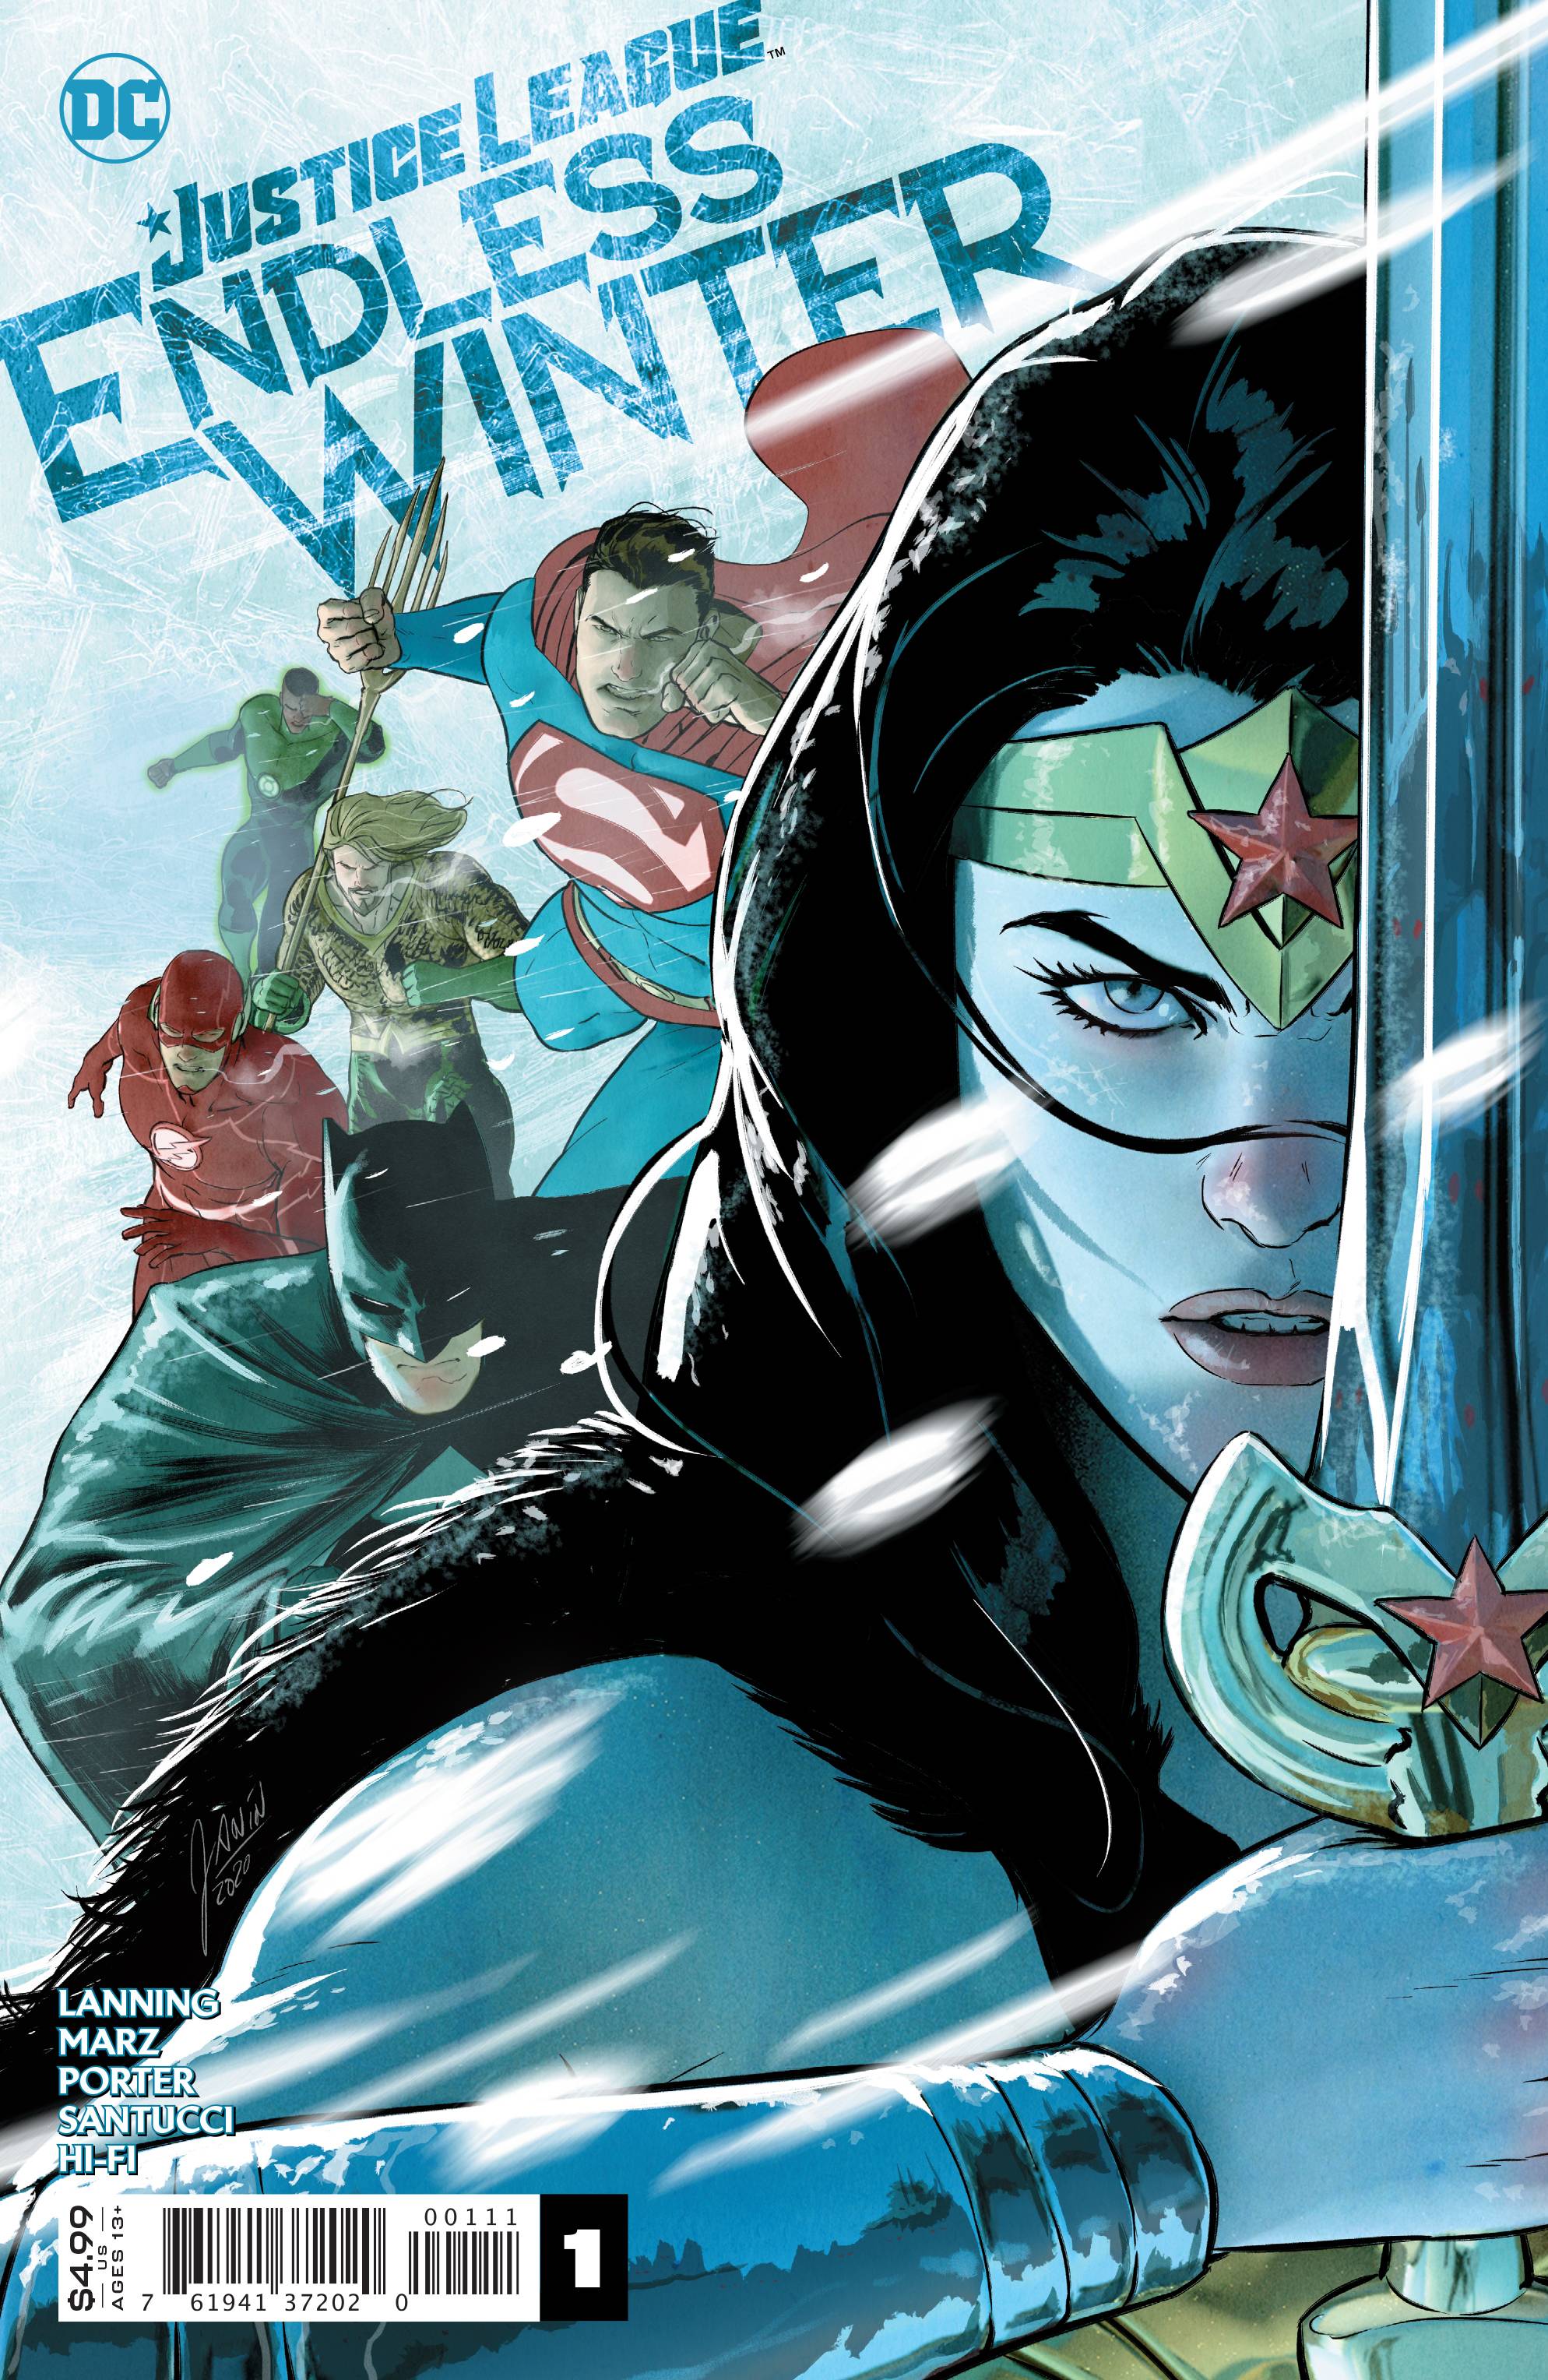 JUSTICE LEAGUE ENDLESS WINTER #1 | Game Master's Emporium (The New GME)